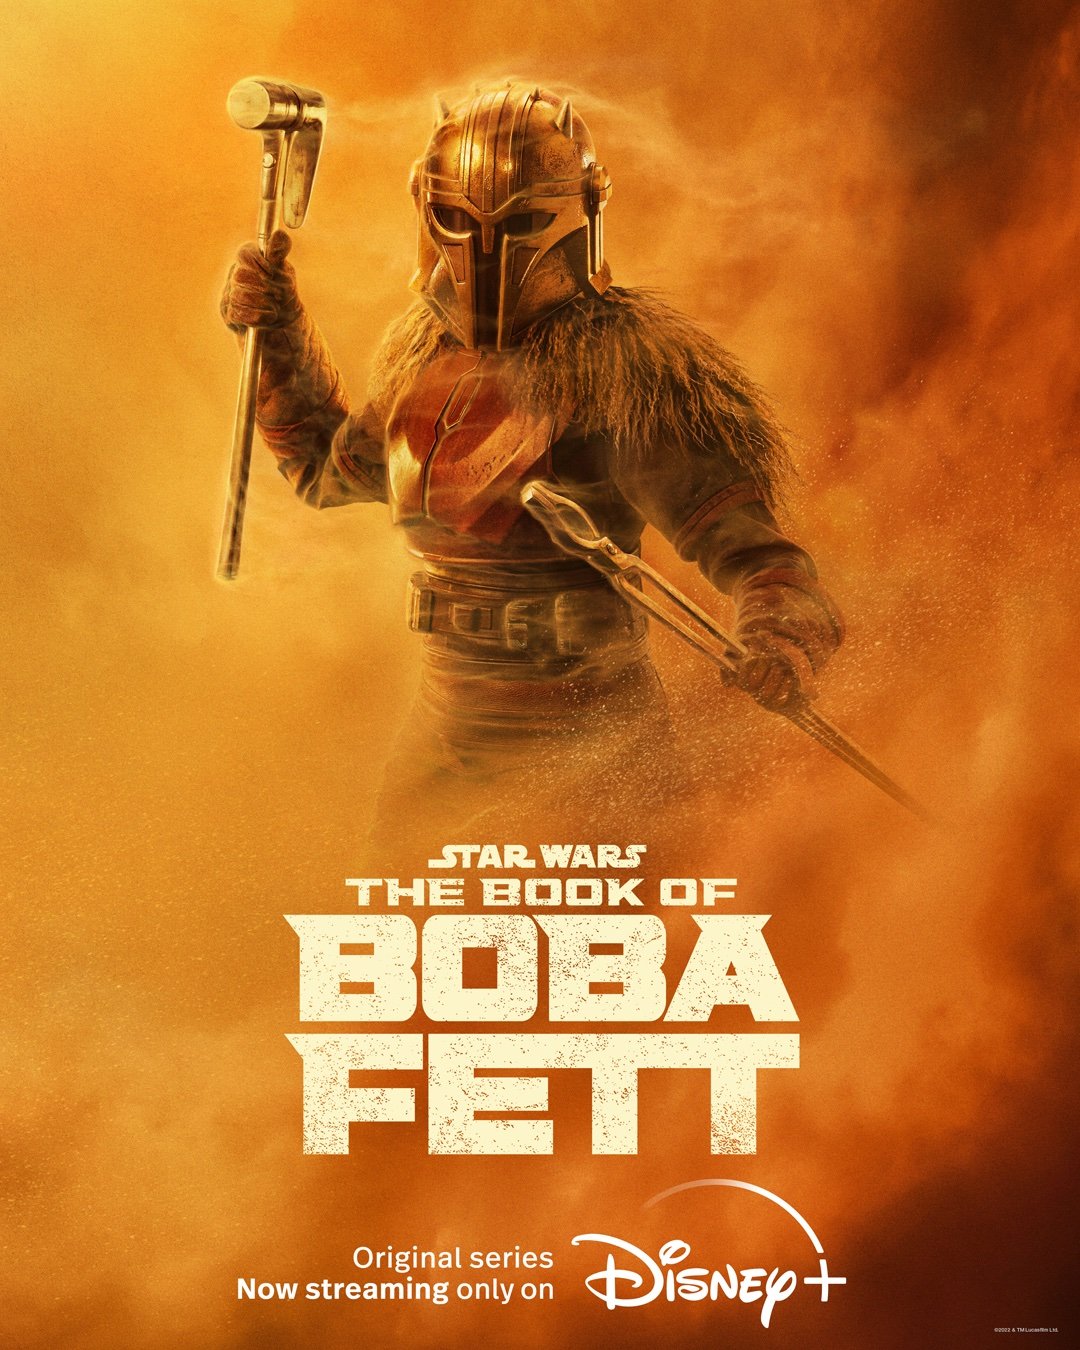 The Book of Boba Fett\' Chapter 5 Character Posters Feature the Return of  the Mandalorian - Star Wars News Net